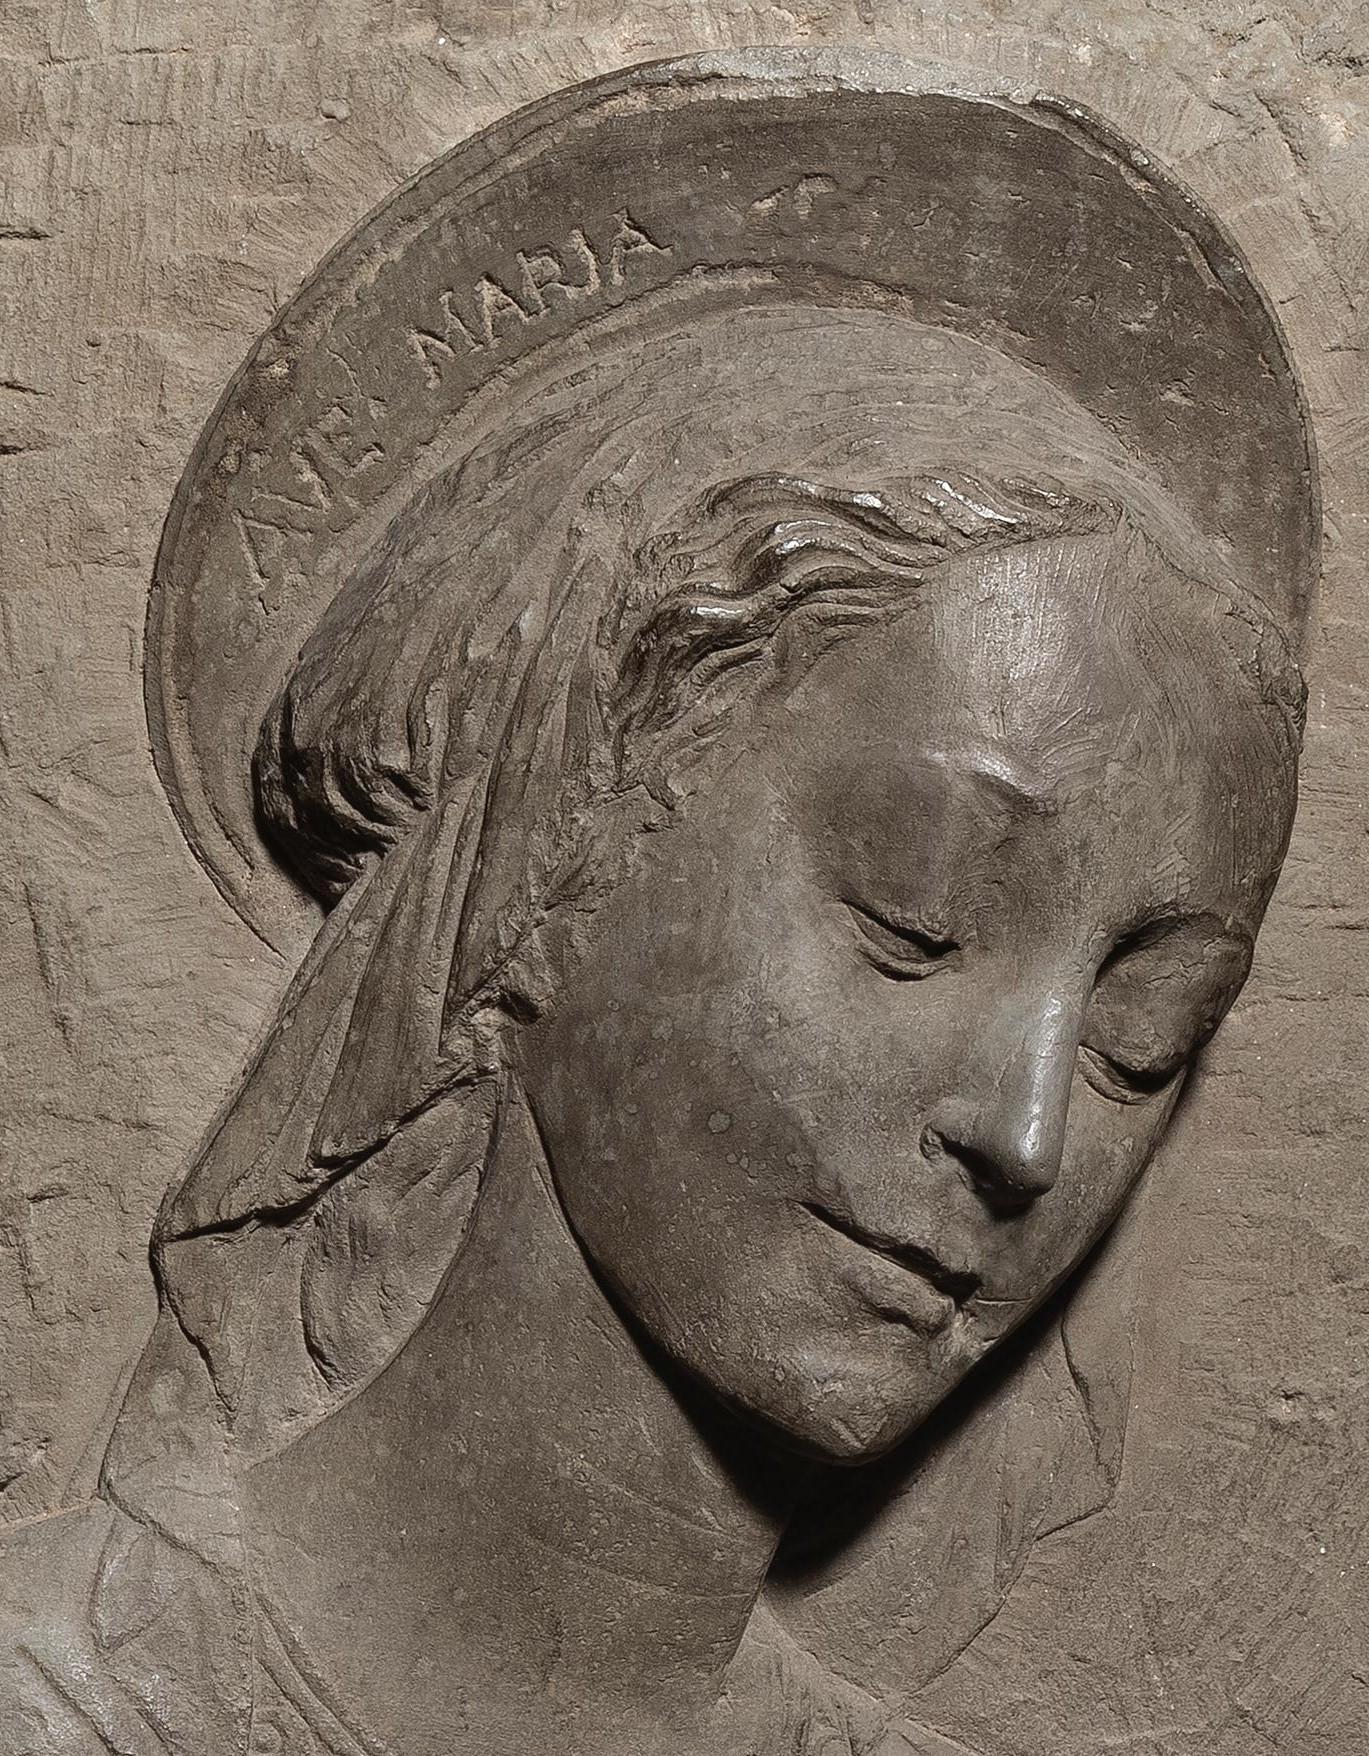 Late 15th Century By Florentine School Madonna with Child Bas-relief - Sculpture by Florentine School of the late 15th century